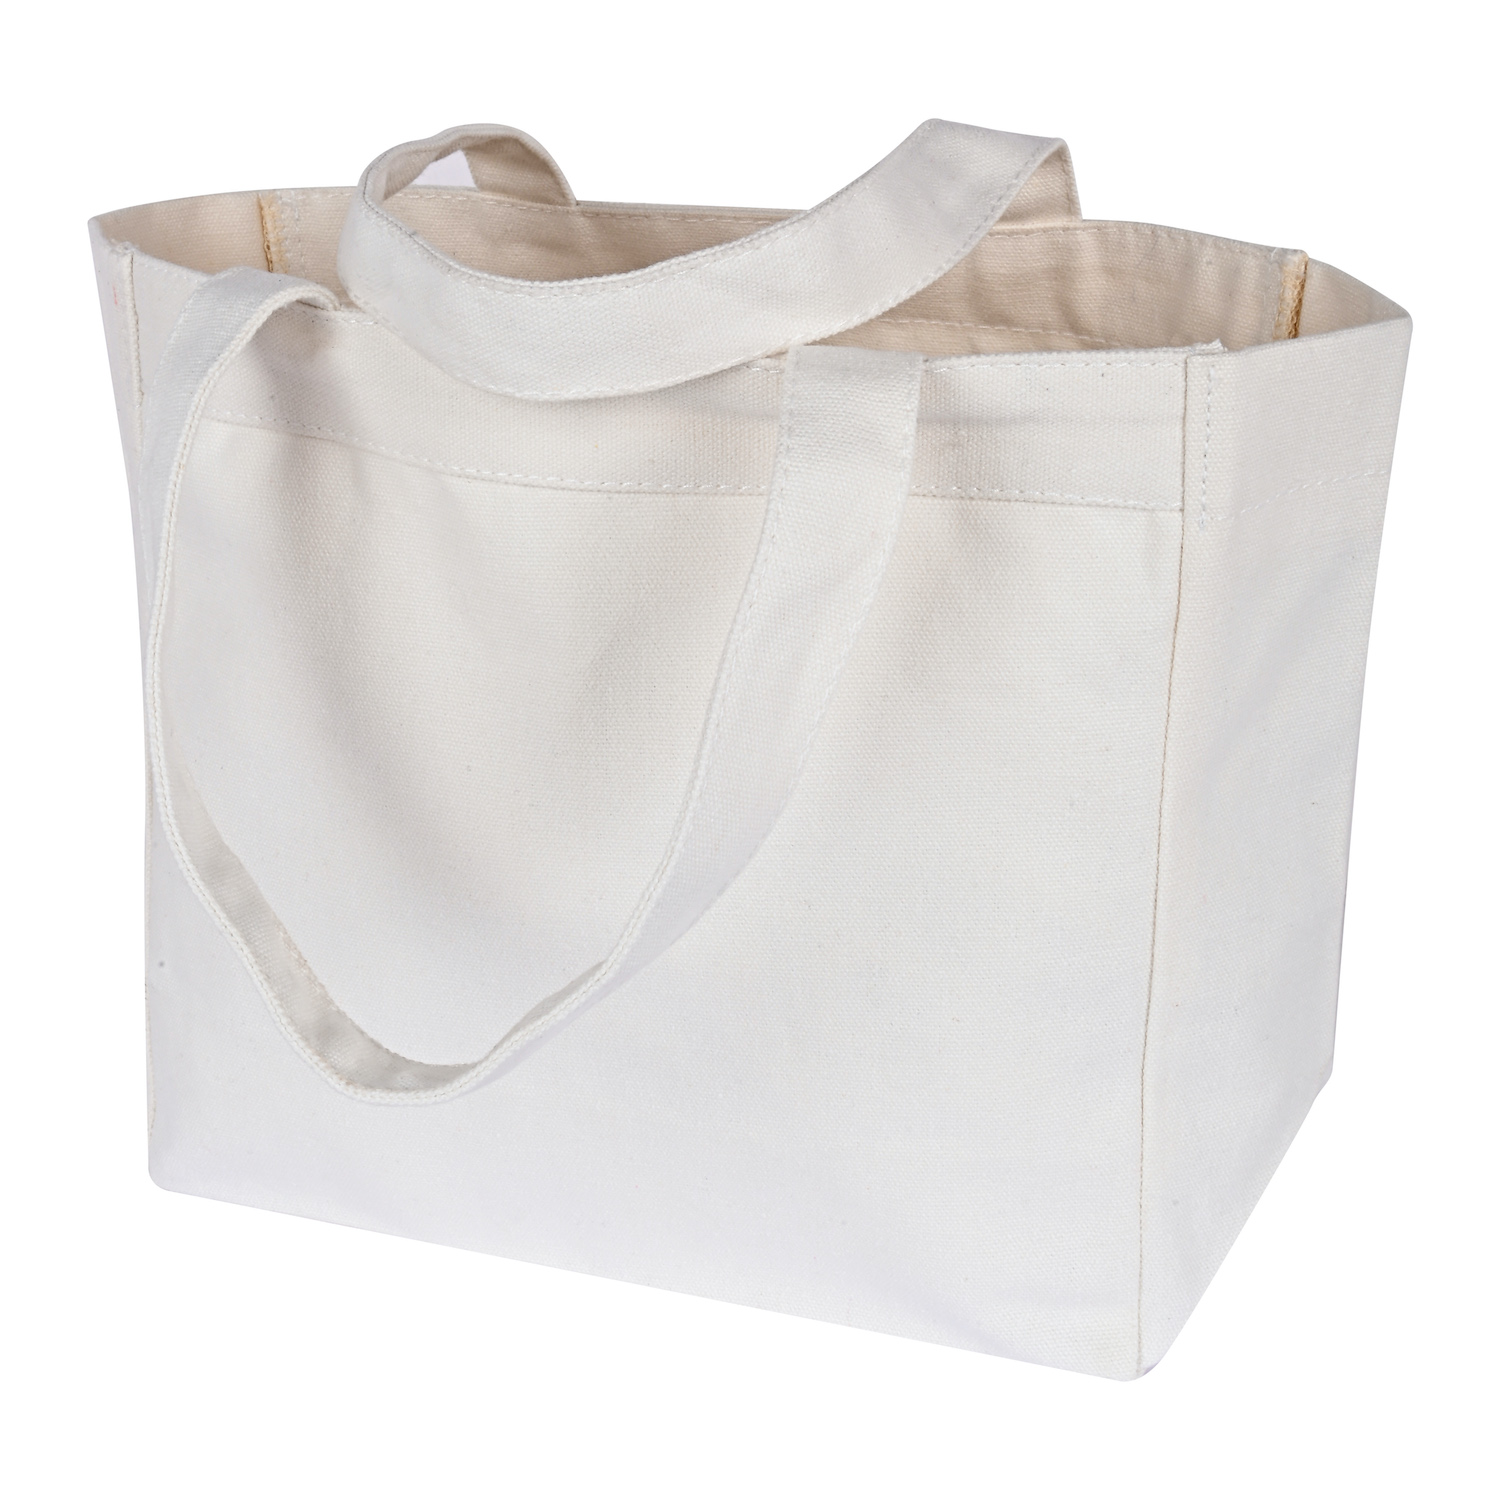 Tote Bags for Lunch Box with Gusset (10 Count) - No Plastic Shop